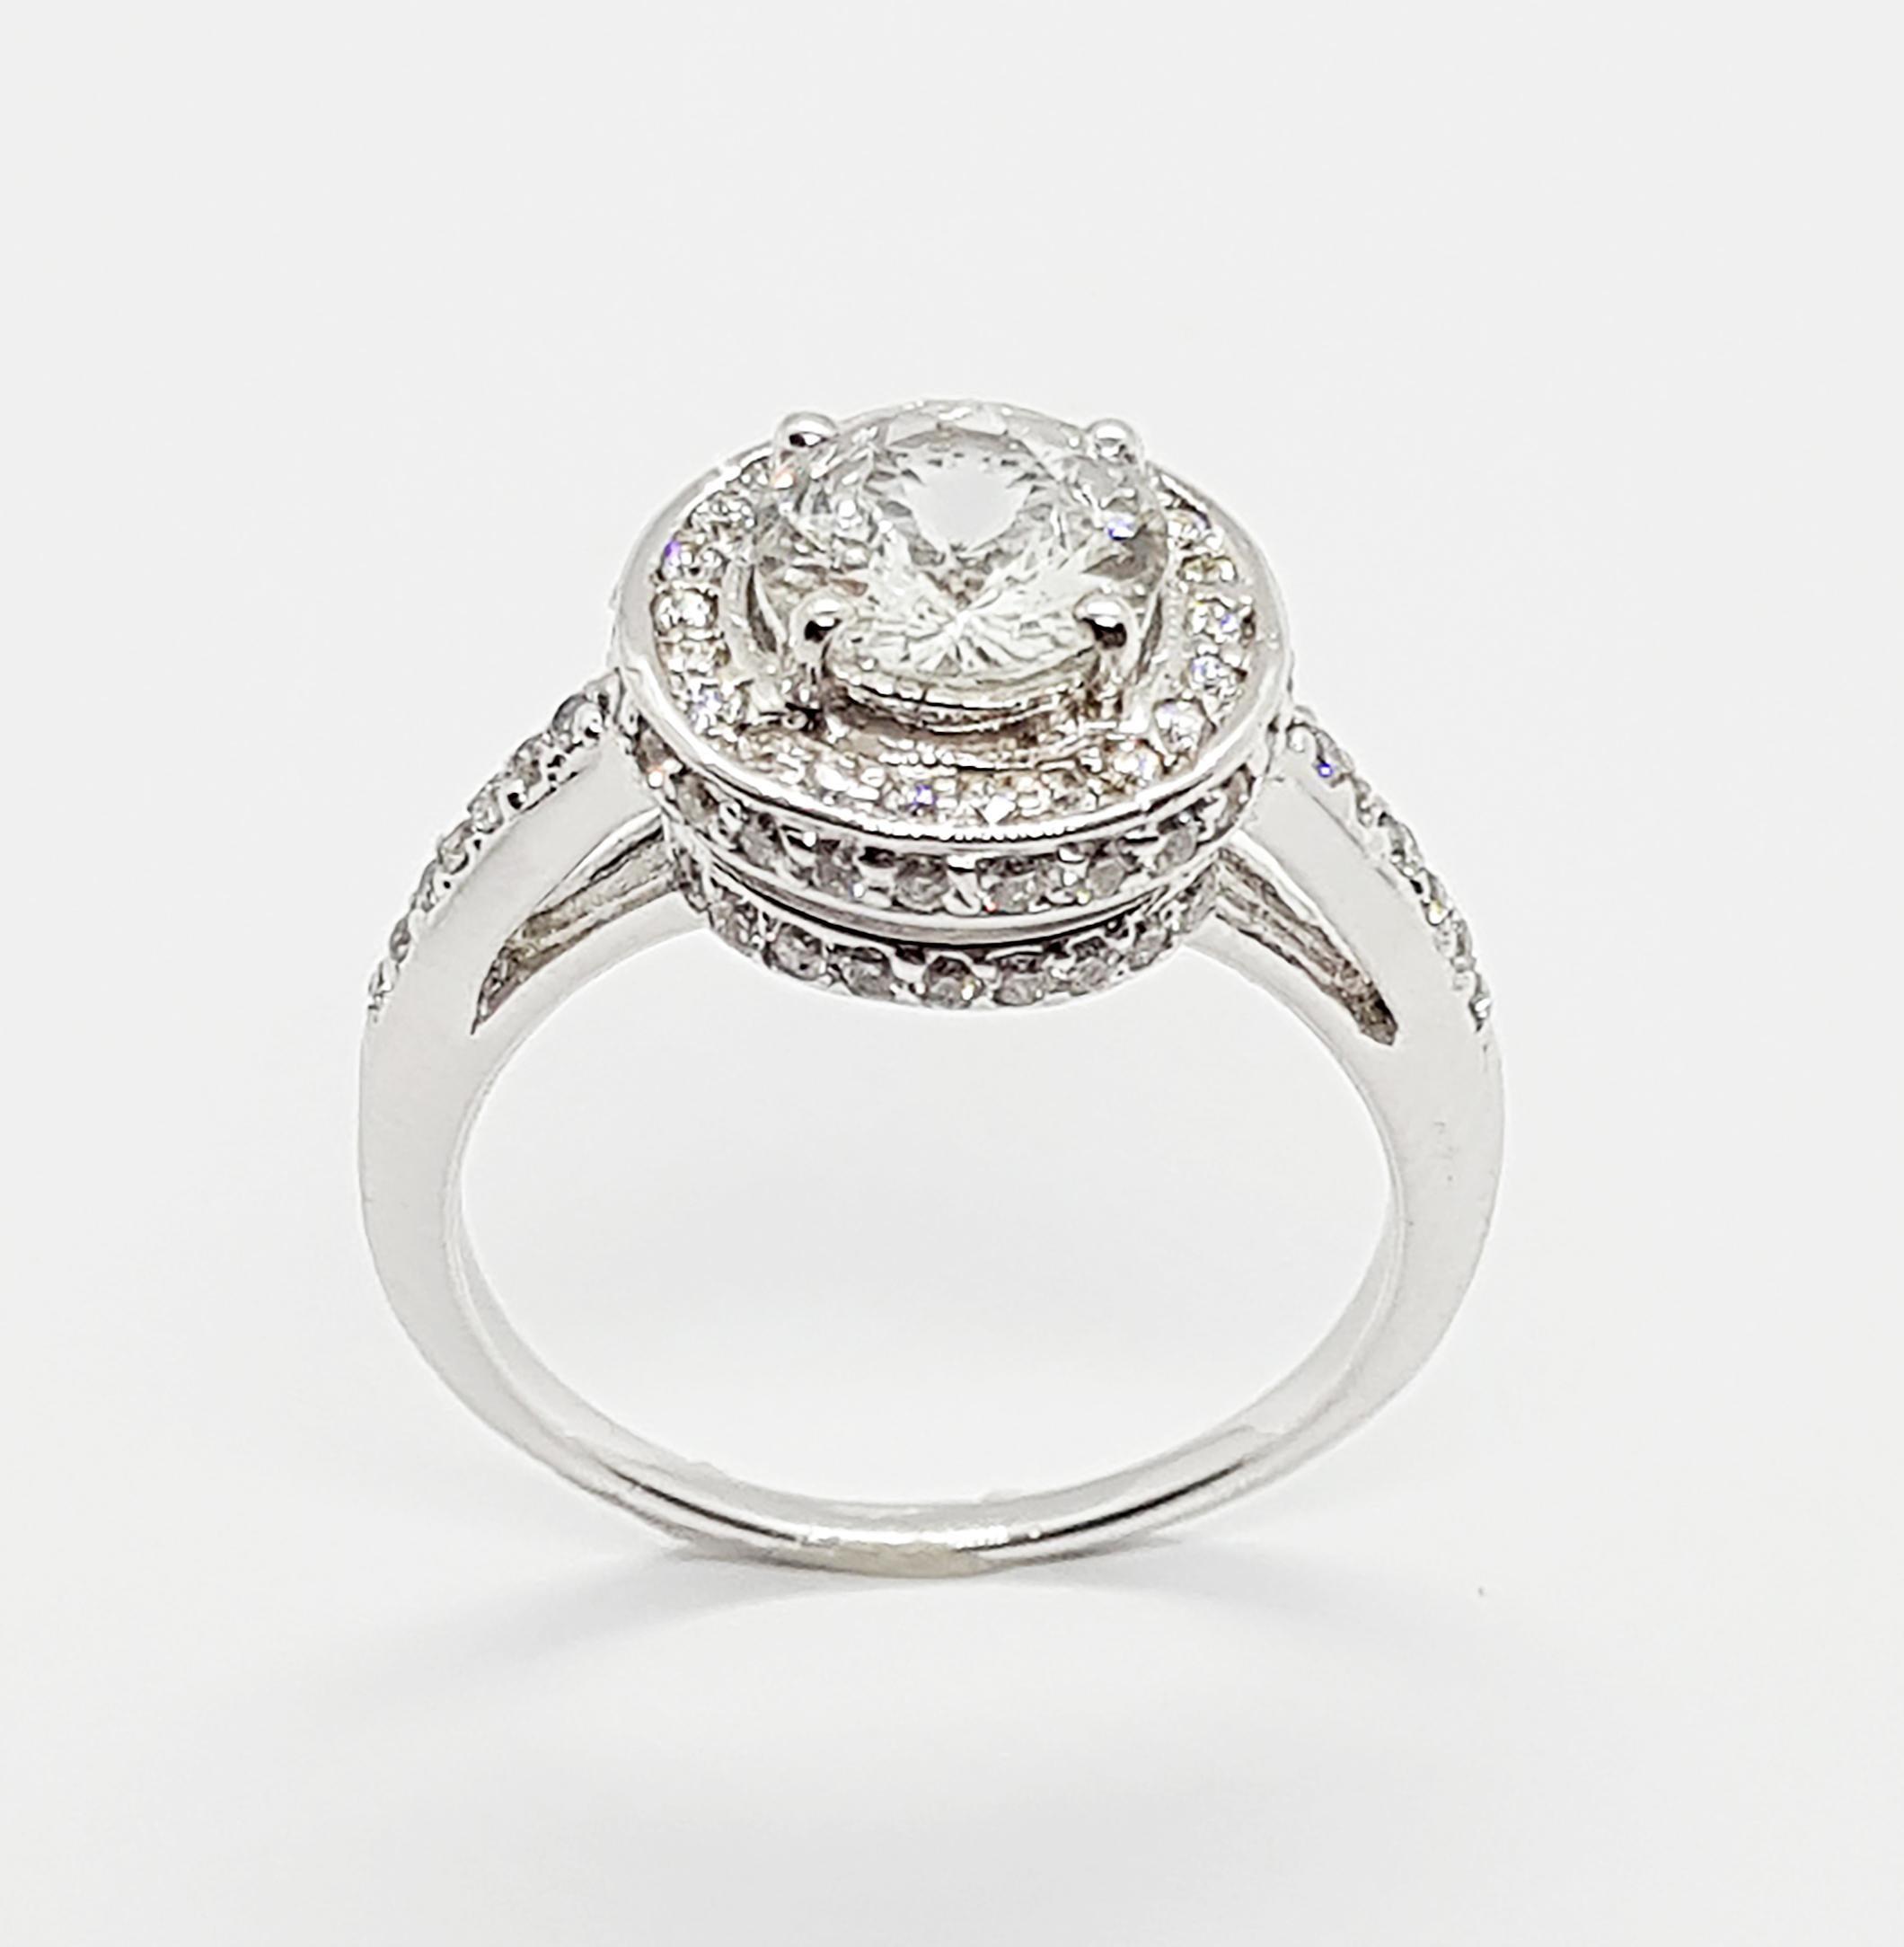 White Sapphire 1.36 carats with Diamond 0.51 carat Ring set in 18 Karat White Gold Settings

Width:  1.2 cm 
Length:  1.2 cm
Ring Size: 53
Total Weight: 5.37 grams

White Sapphire 
Width:  0.7 cm 
Length:  0.7 cm

